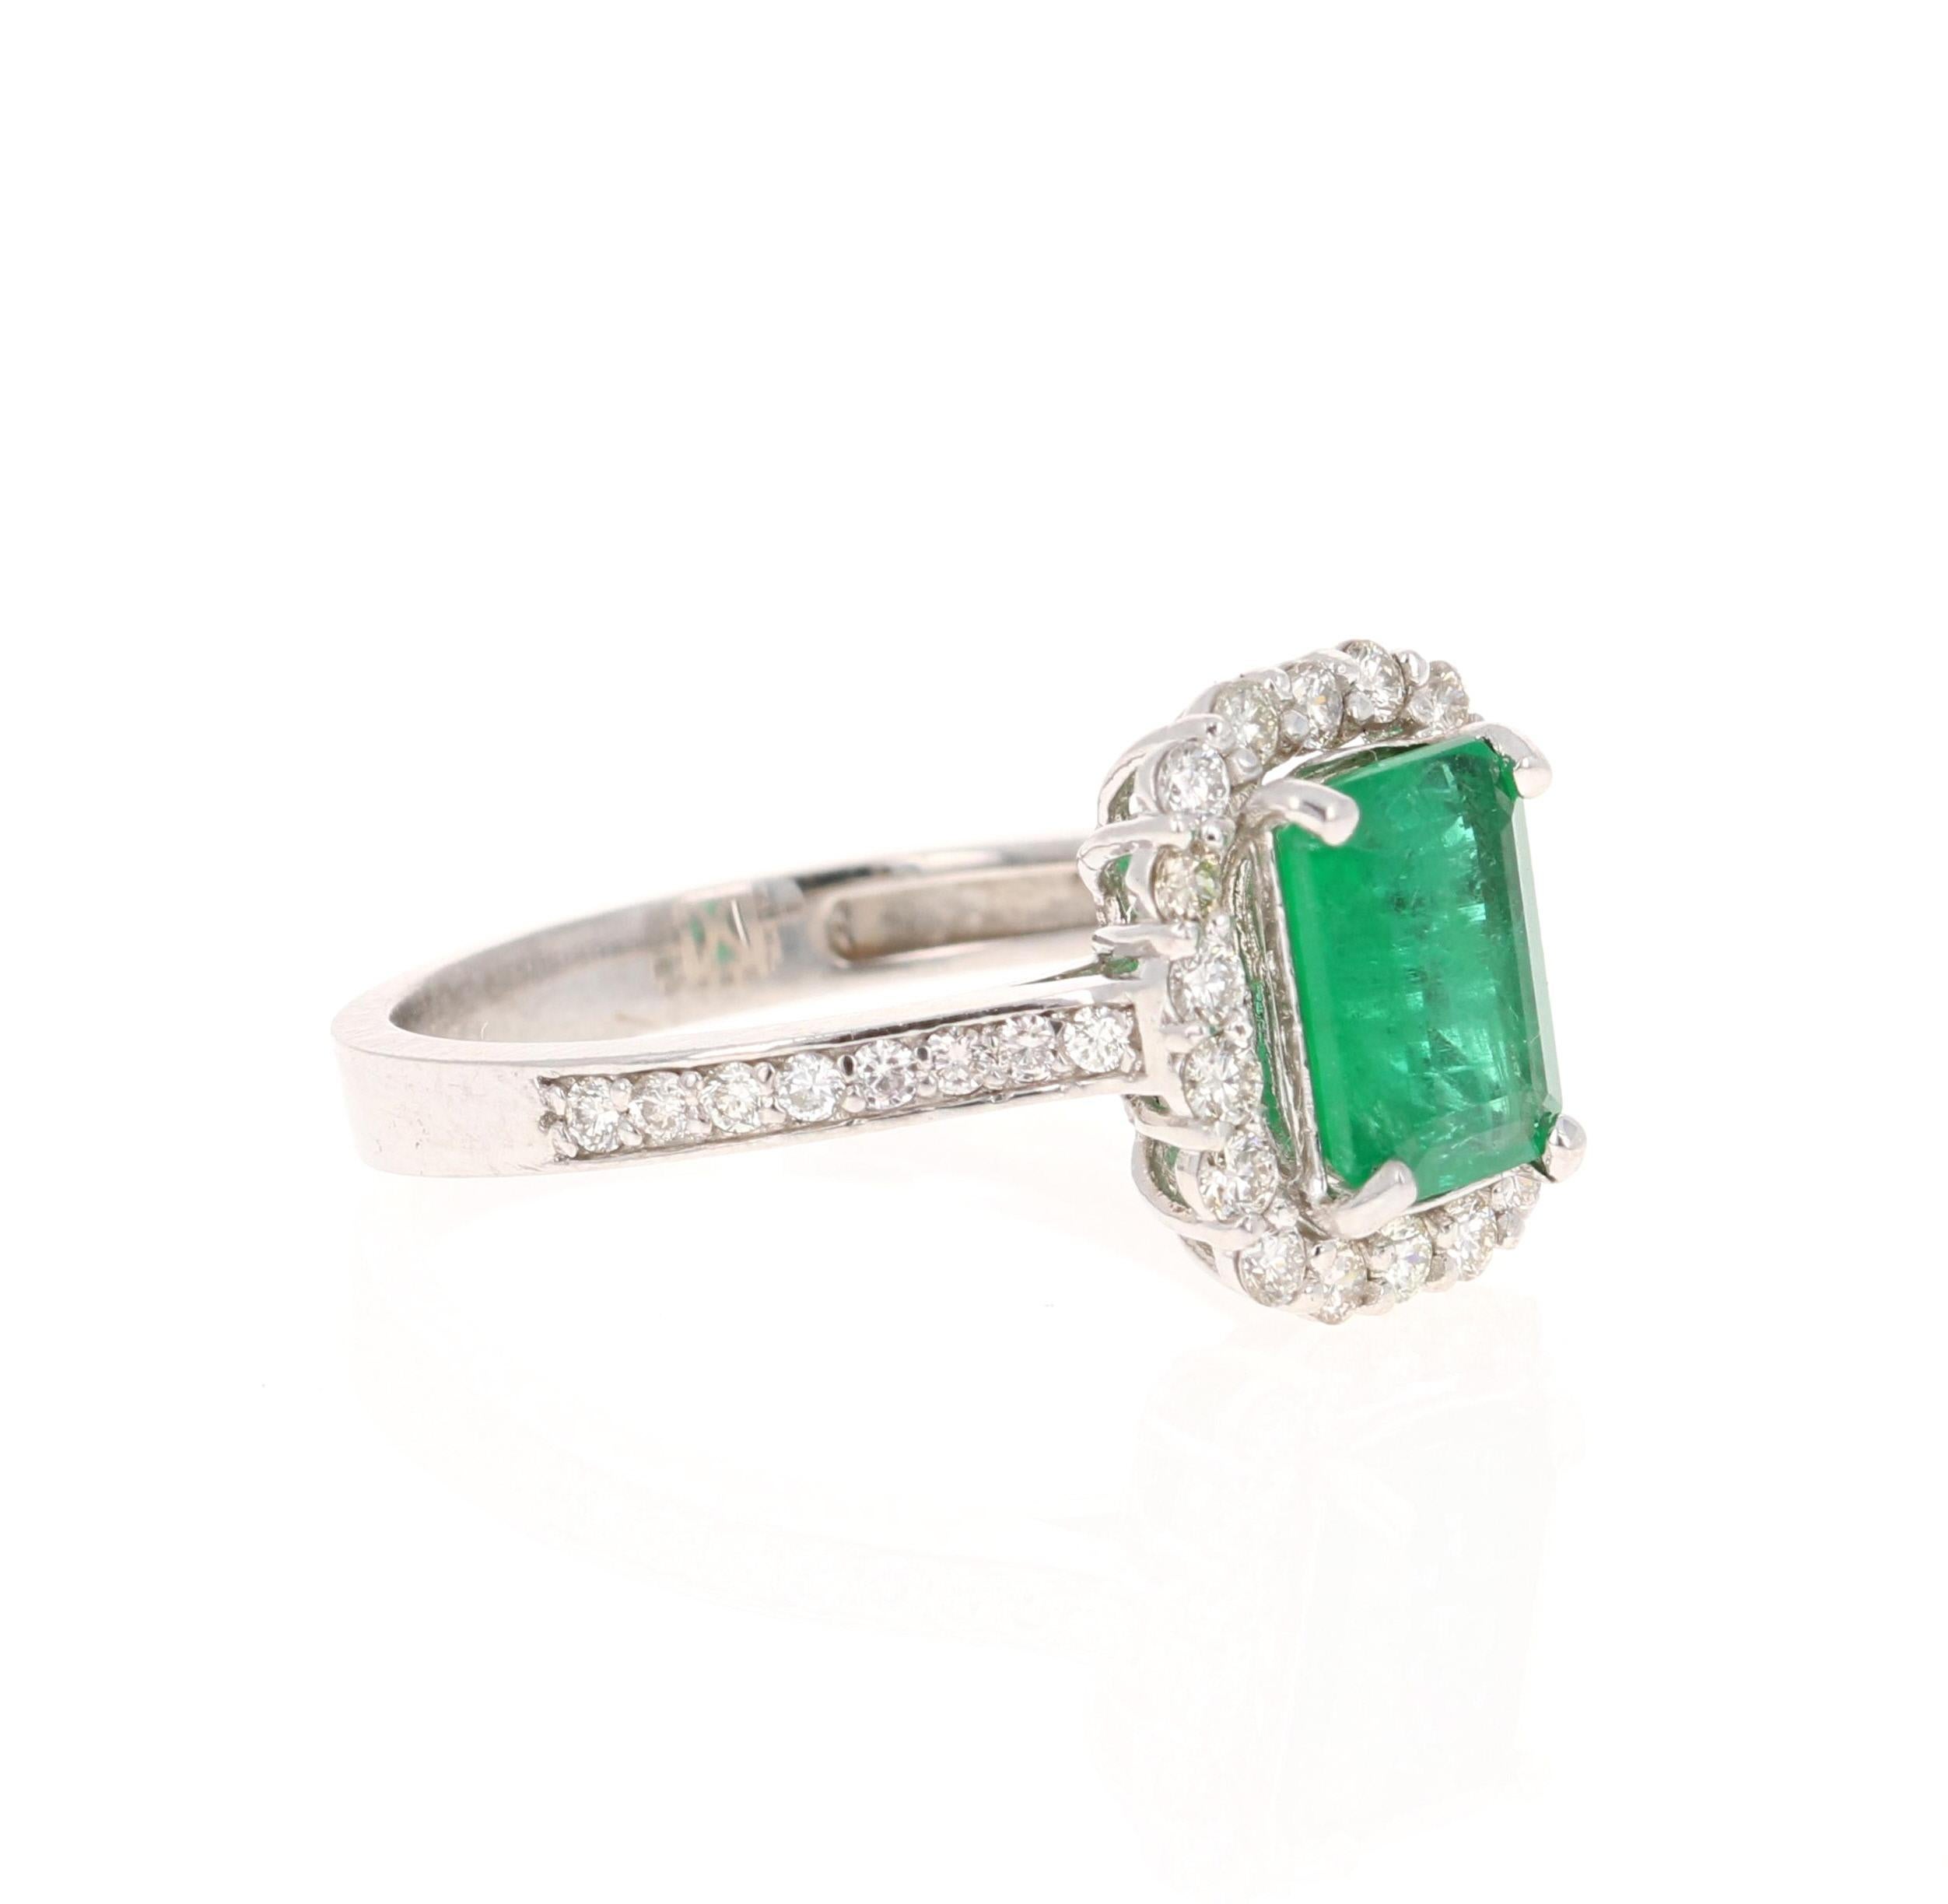 This ring has a Emerald Cut Emerald that weighs 1.24 carat and also has 36 Round Cut Diamonds that weigh 0.46 carats. The total carat weight of the ring is 1.70 carats. The clarity and color of the diamonds are VS-H. 

The ring is curated in 14K